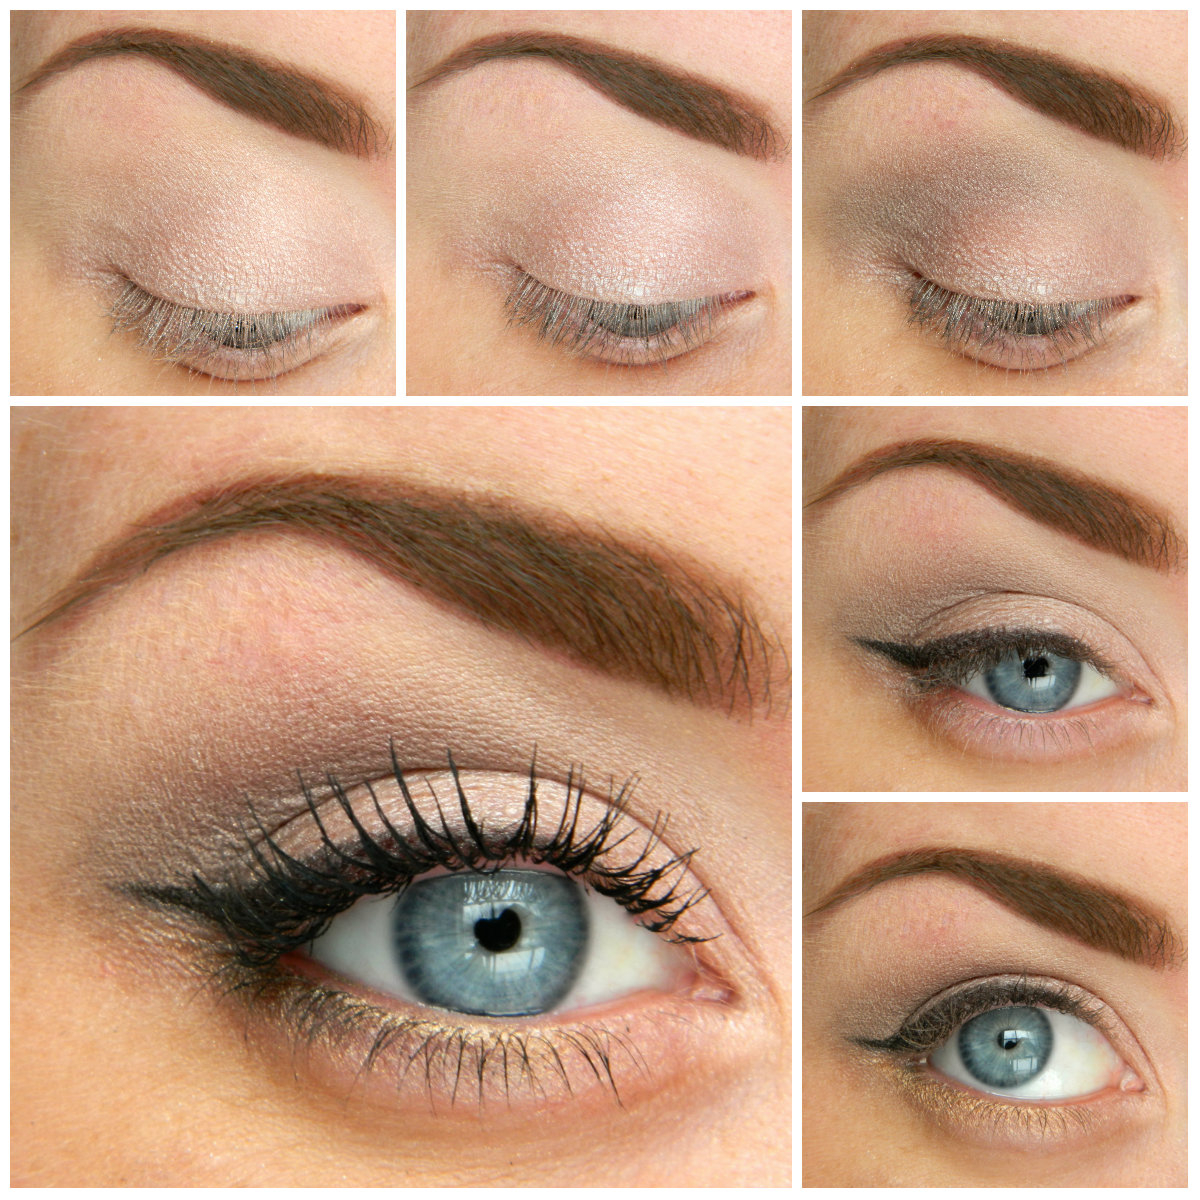 Makeup Tutorial For Blue Eyes 5 Ways To Make Blue Eyes Pop With Proper Eye Makeup Her Style Code